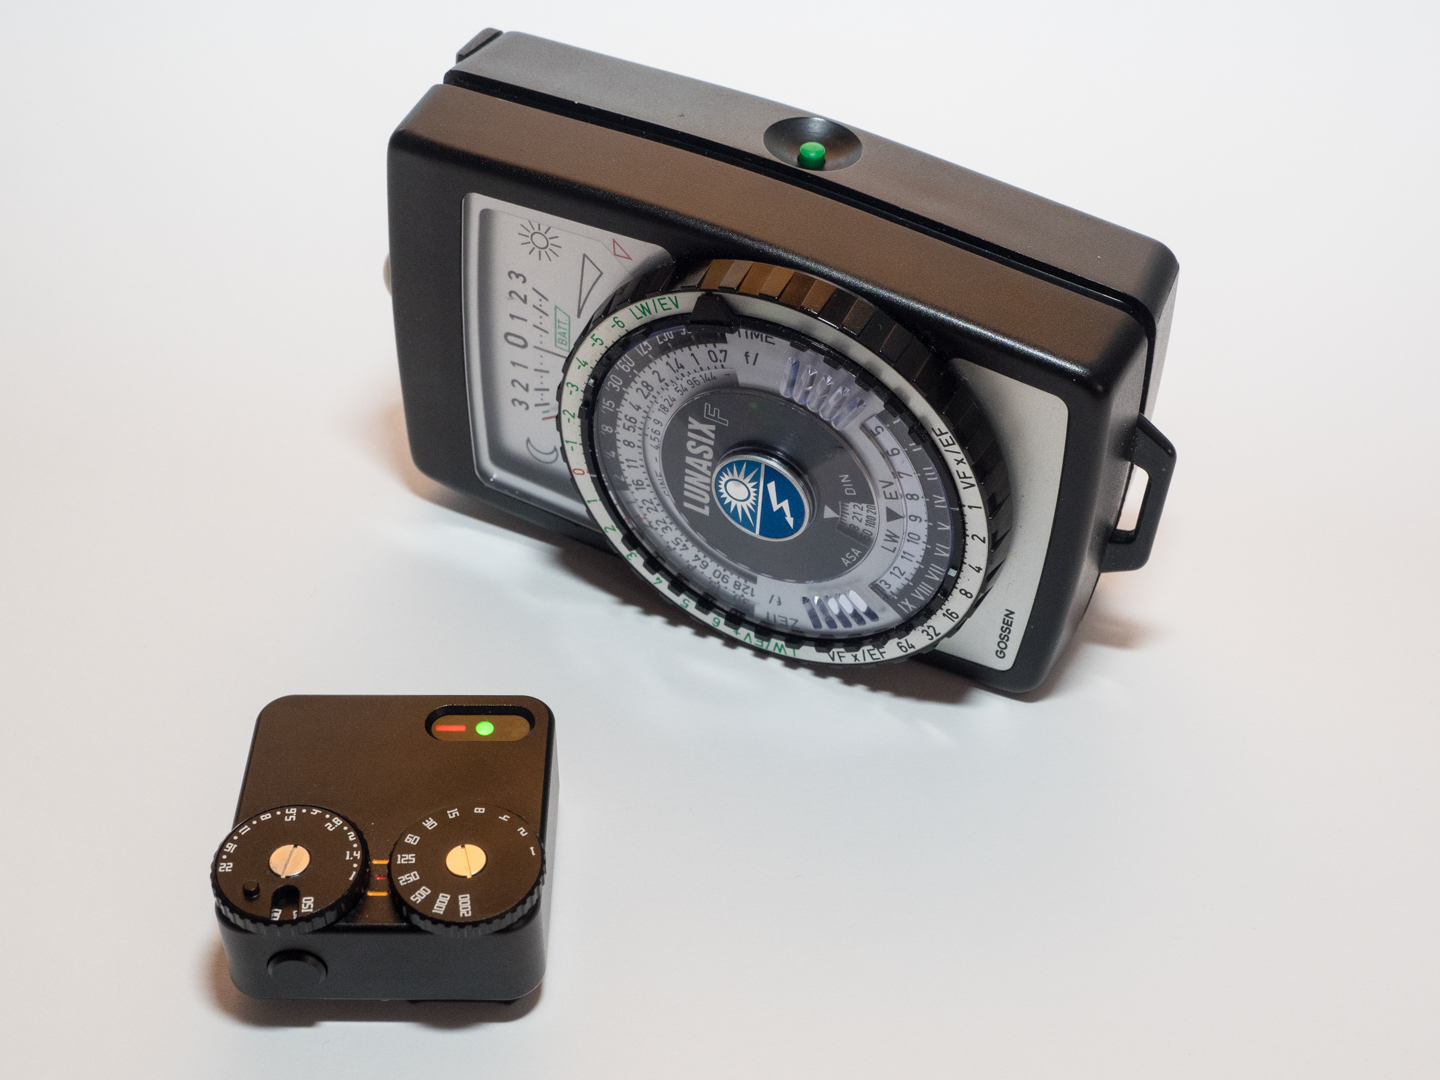 Hand-held or attachable, historic or modern? Some thoughts on light meters - Jörg-Peter Rau